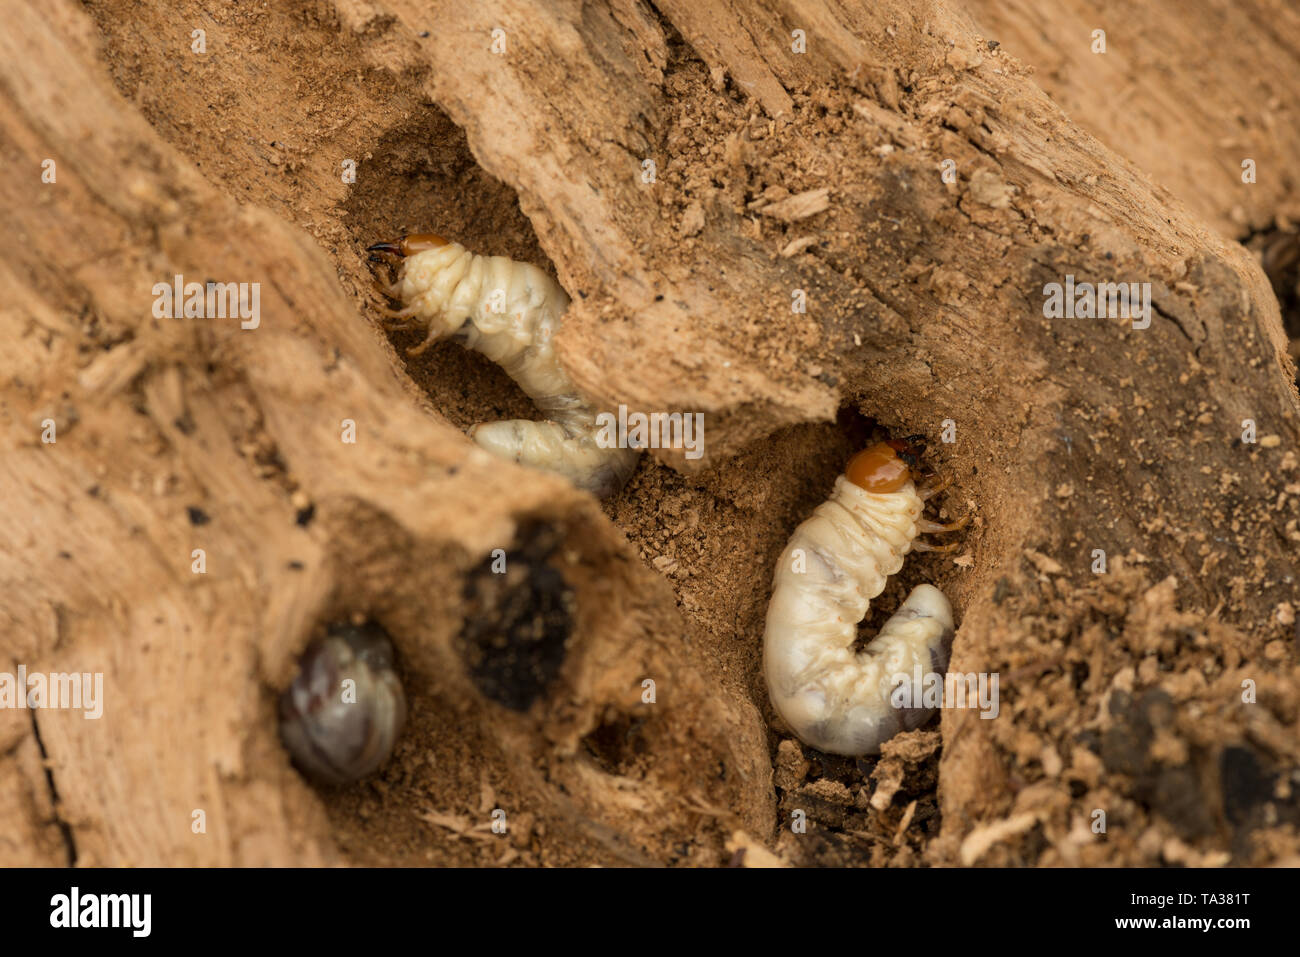 Stag beetle, Lucanus cervus, larvae burrowing in dead ash tree making network of tunnels and C-shaped chambers, possible mature instar Stock Photo